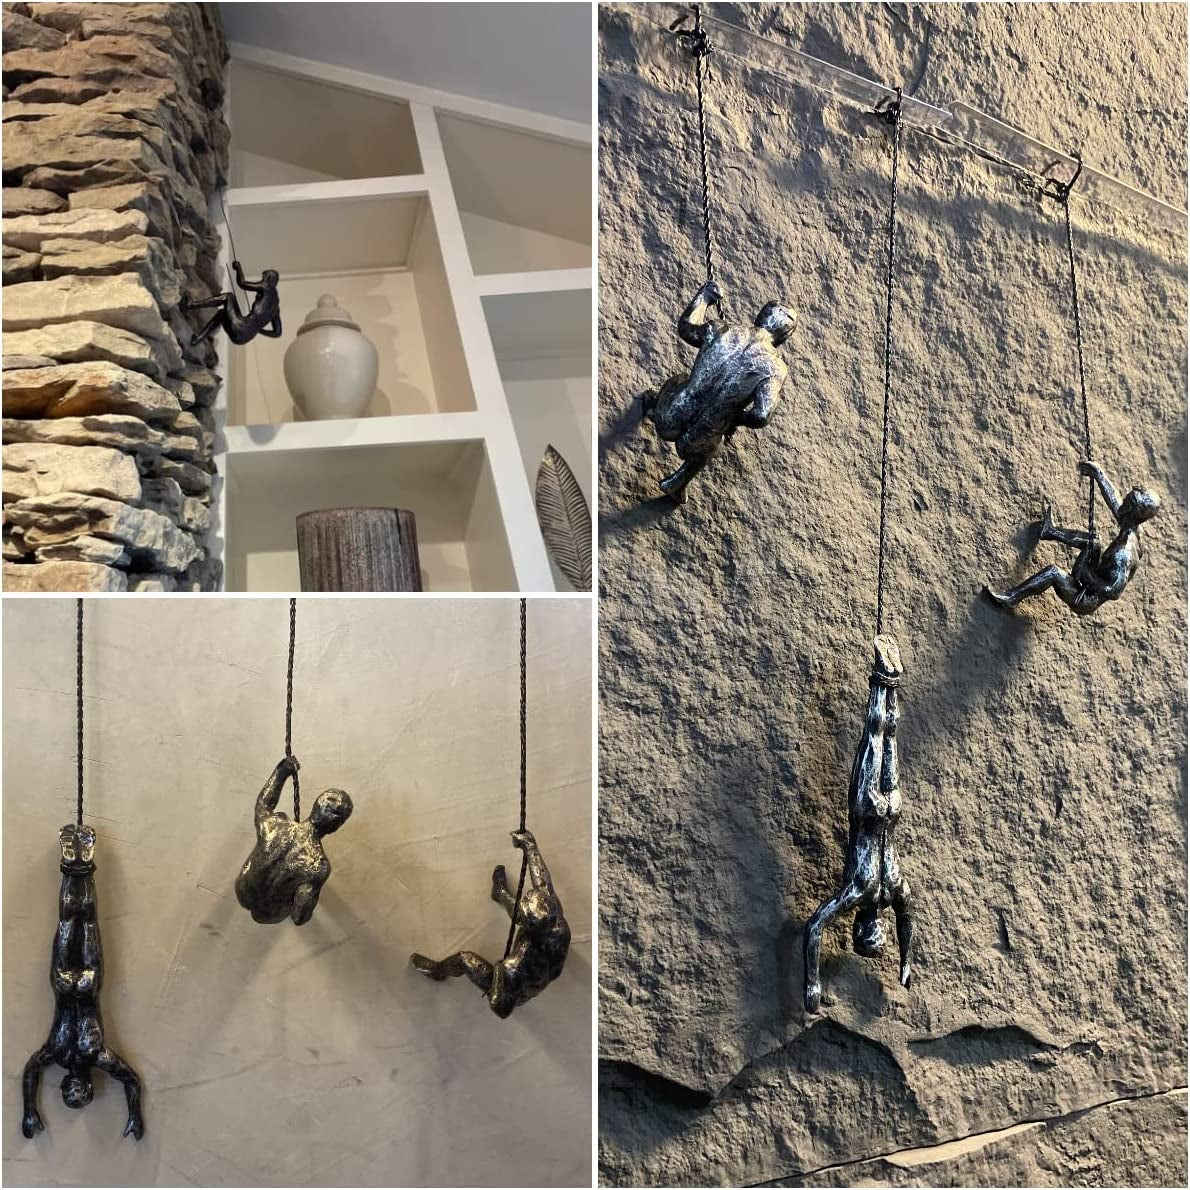 Set of 3 Climbing Men 7.8" down Climbing Man Wall Art Decor Rock Climbing Gifts Modern 3D for Men'S Unique Sports & Outdoors Sculpture for Bedroom Home Office Company- and 4.5” Left/Right